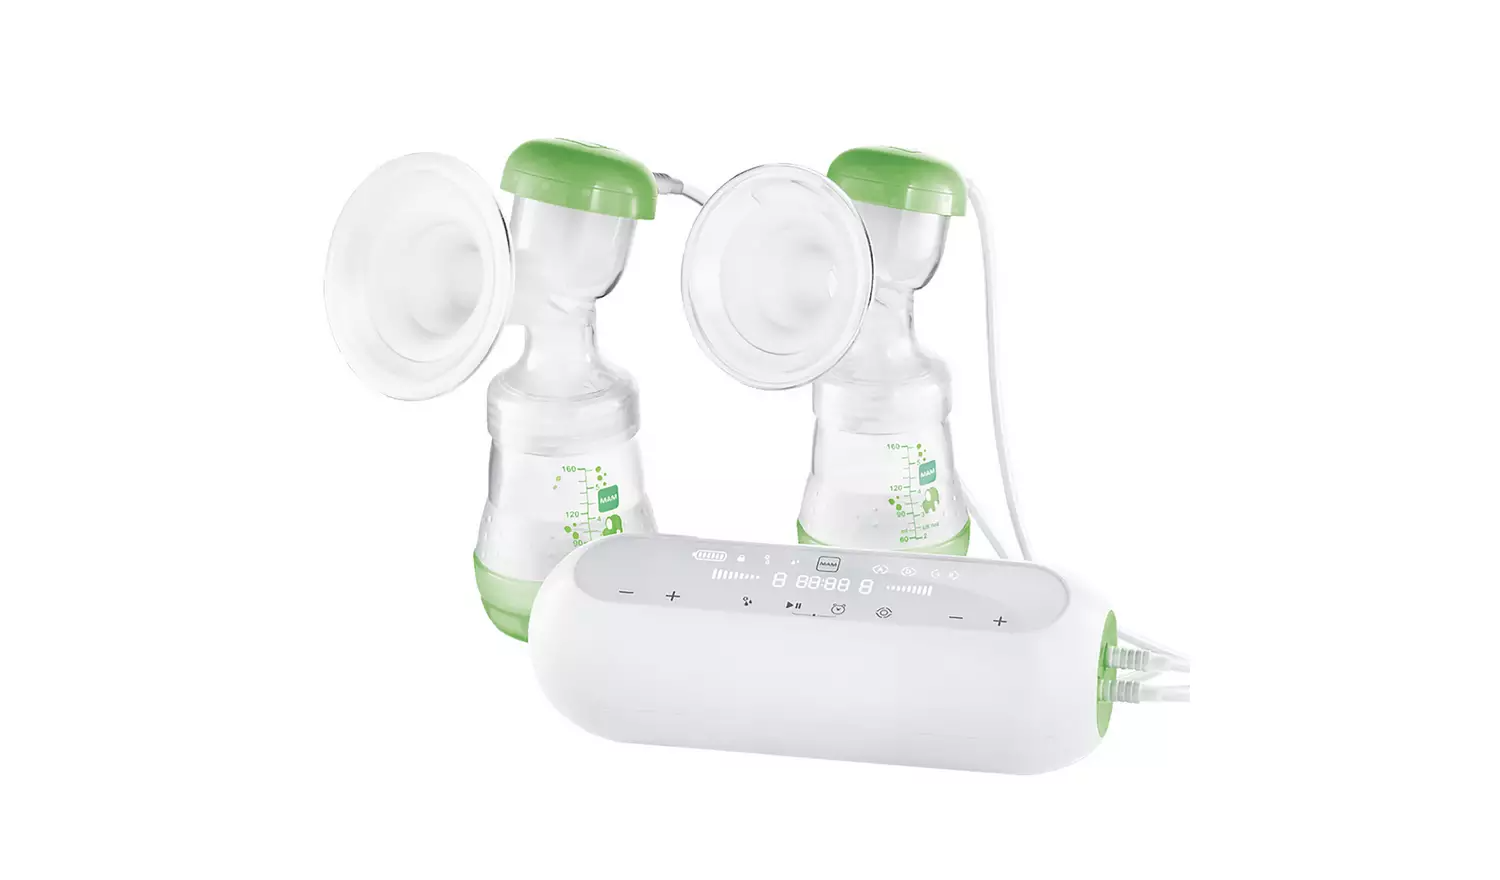 MAM 2-in-1 Double Electric Breast Pump